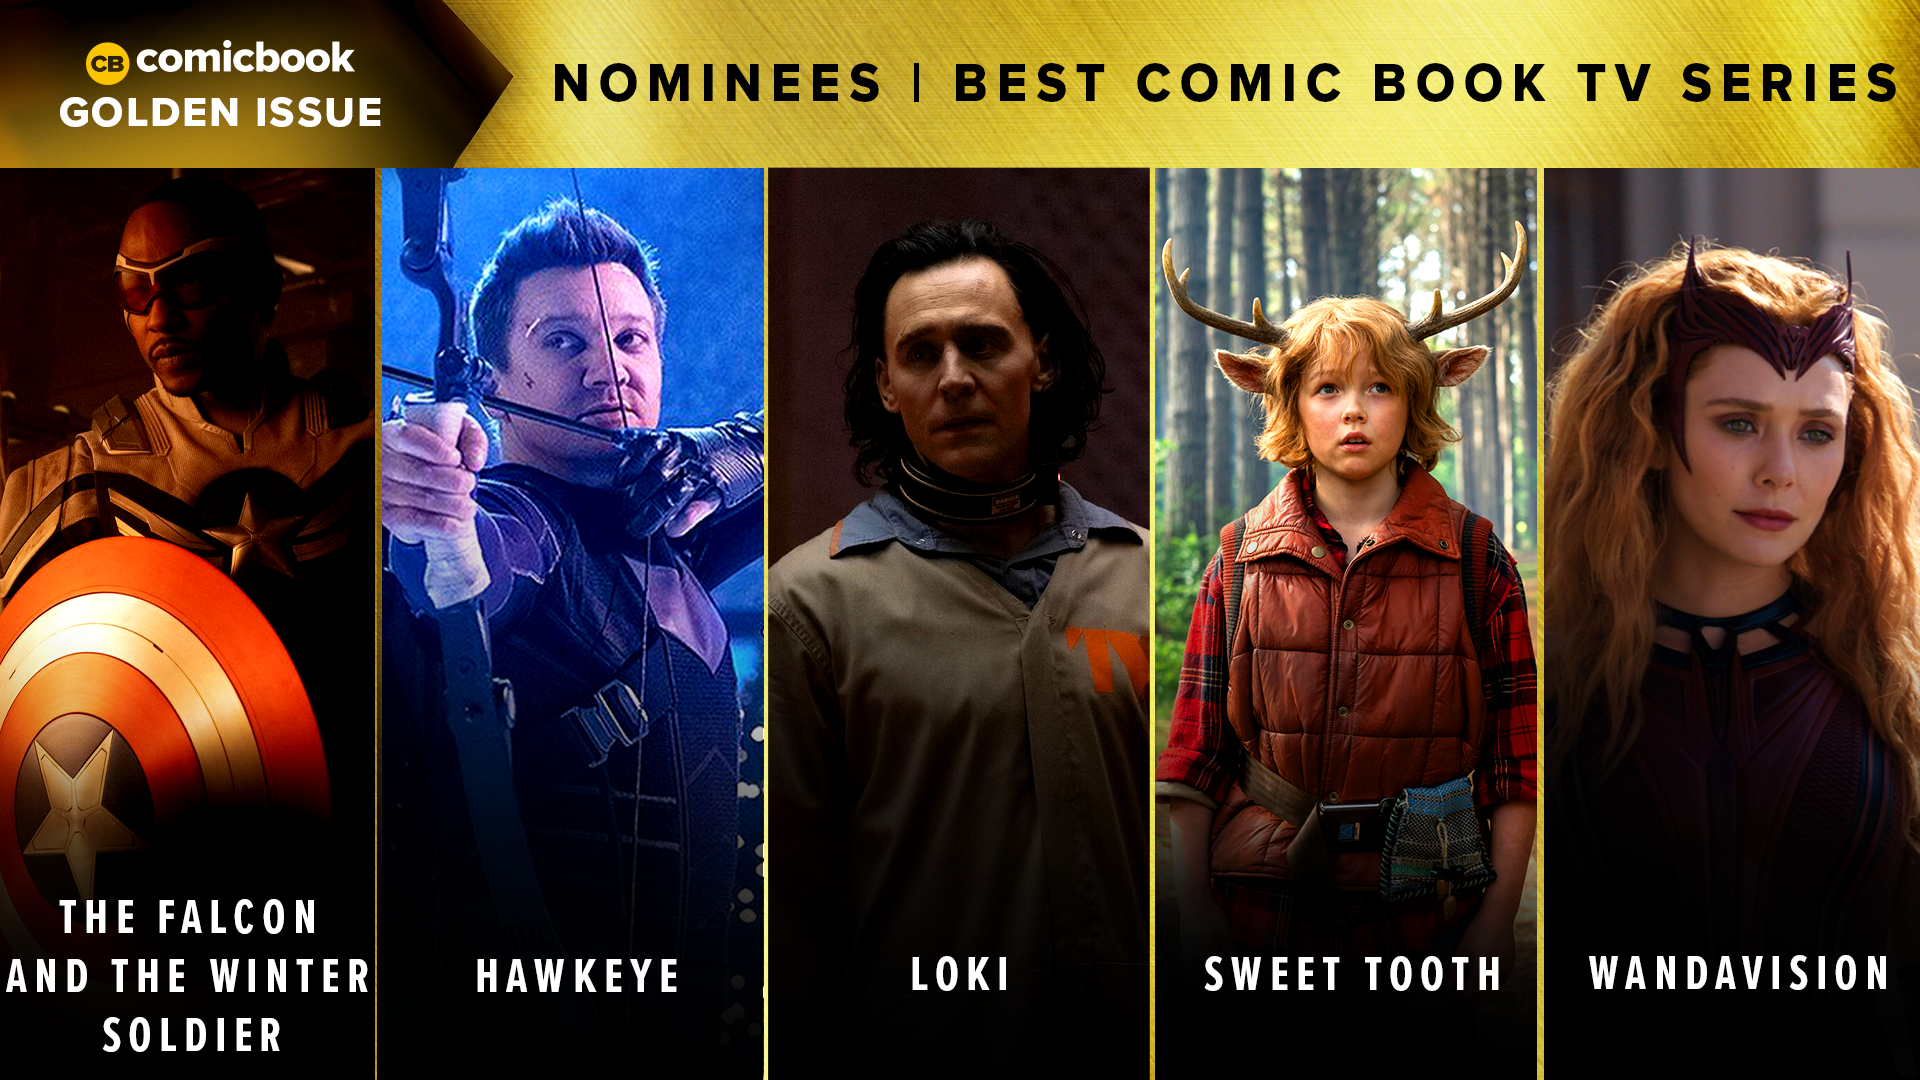 golden-issues-2021-nominees-best-comic-book-tv-series.png